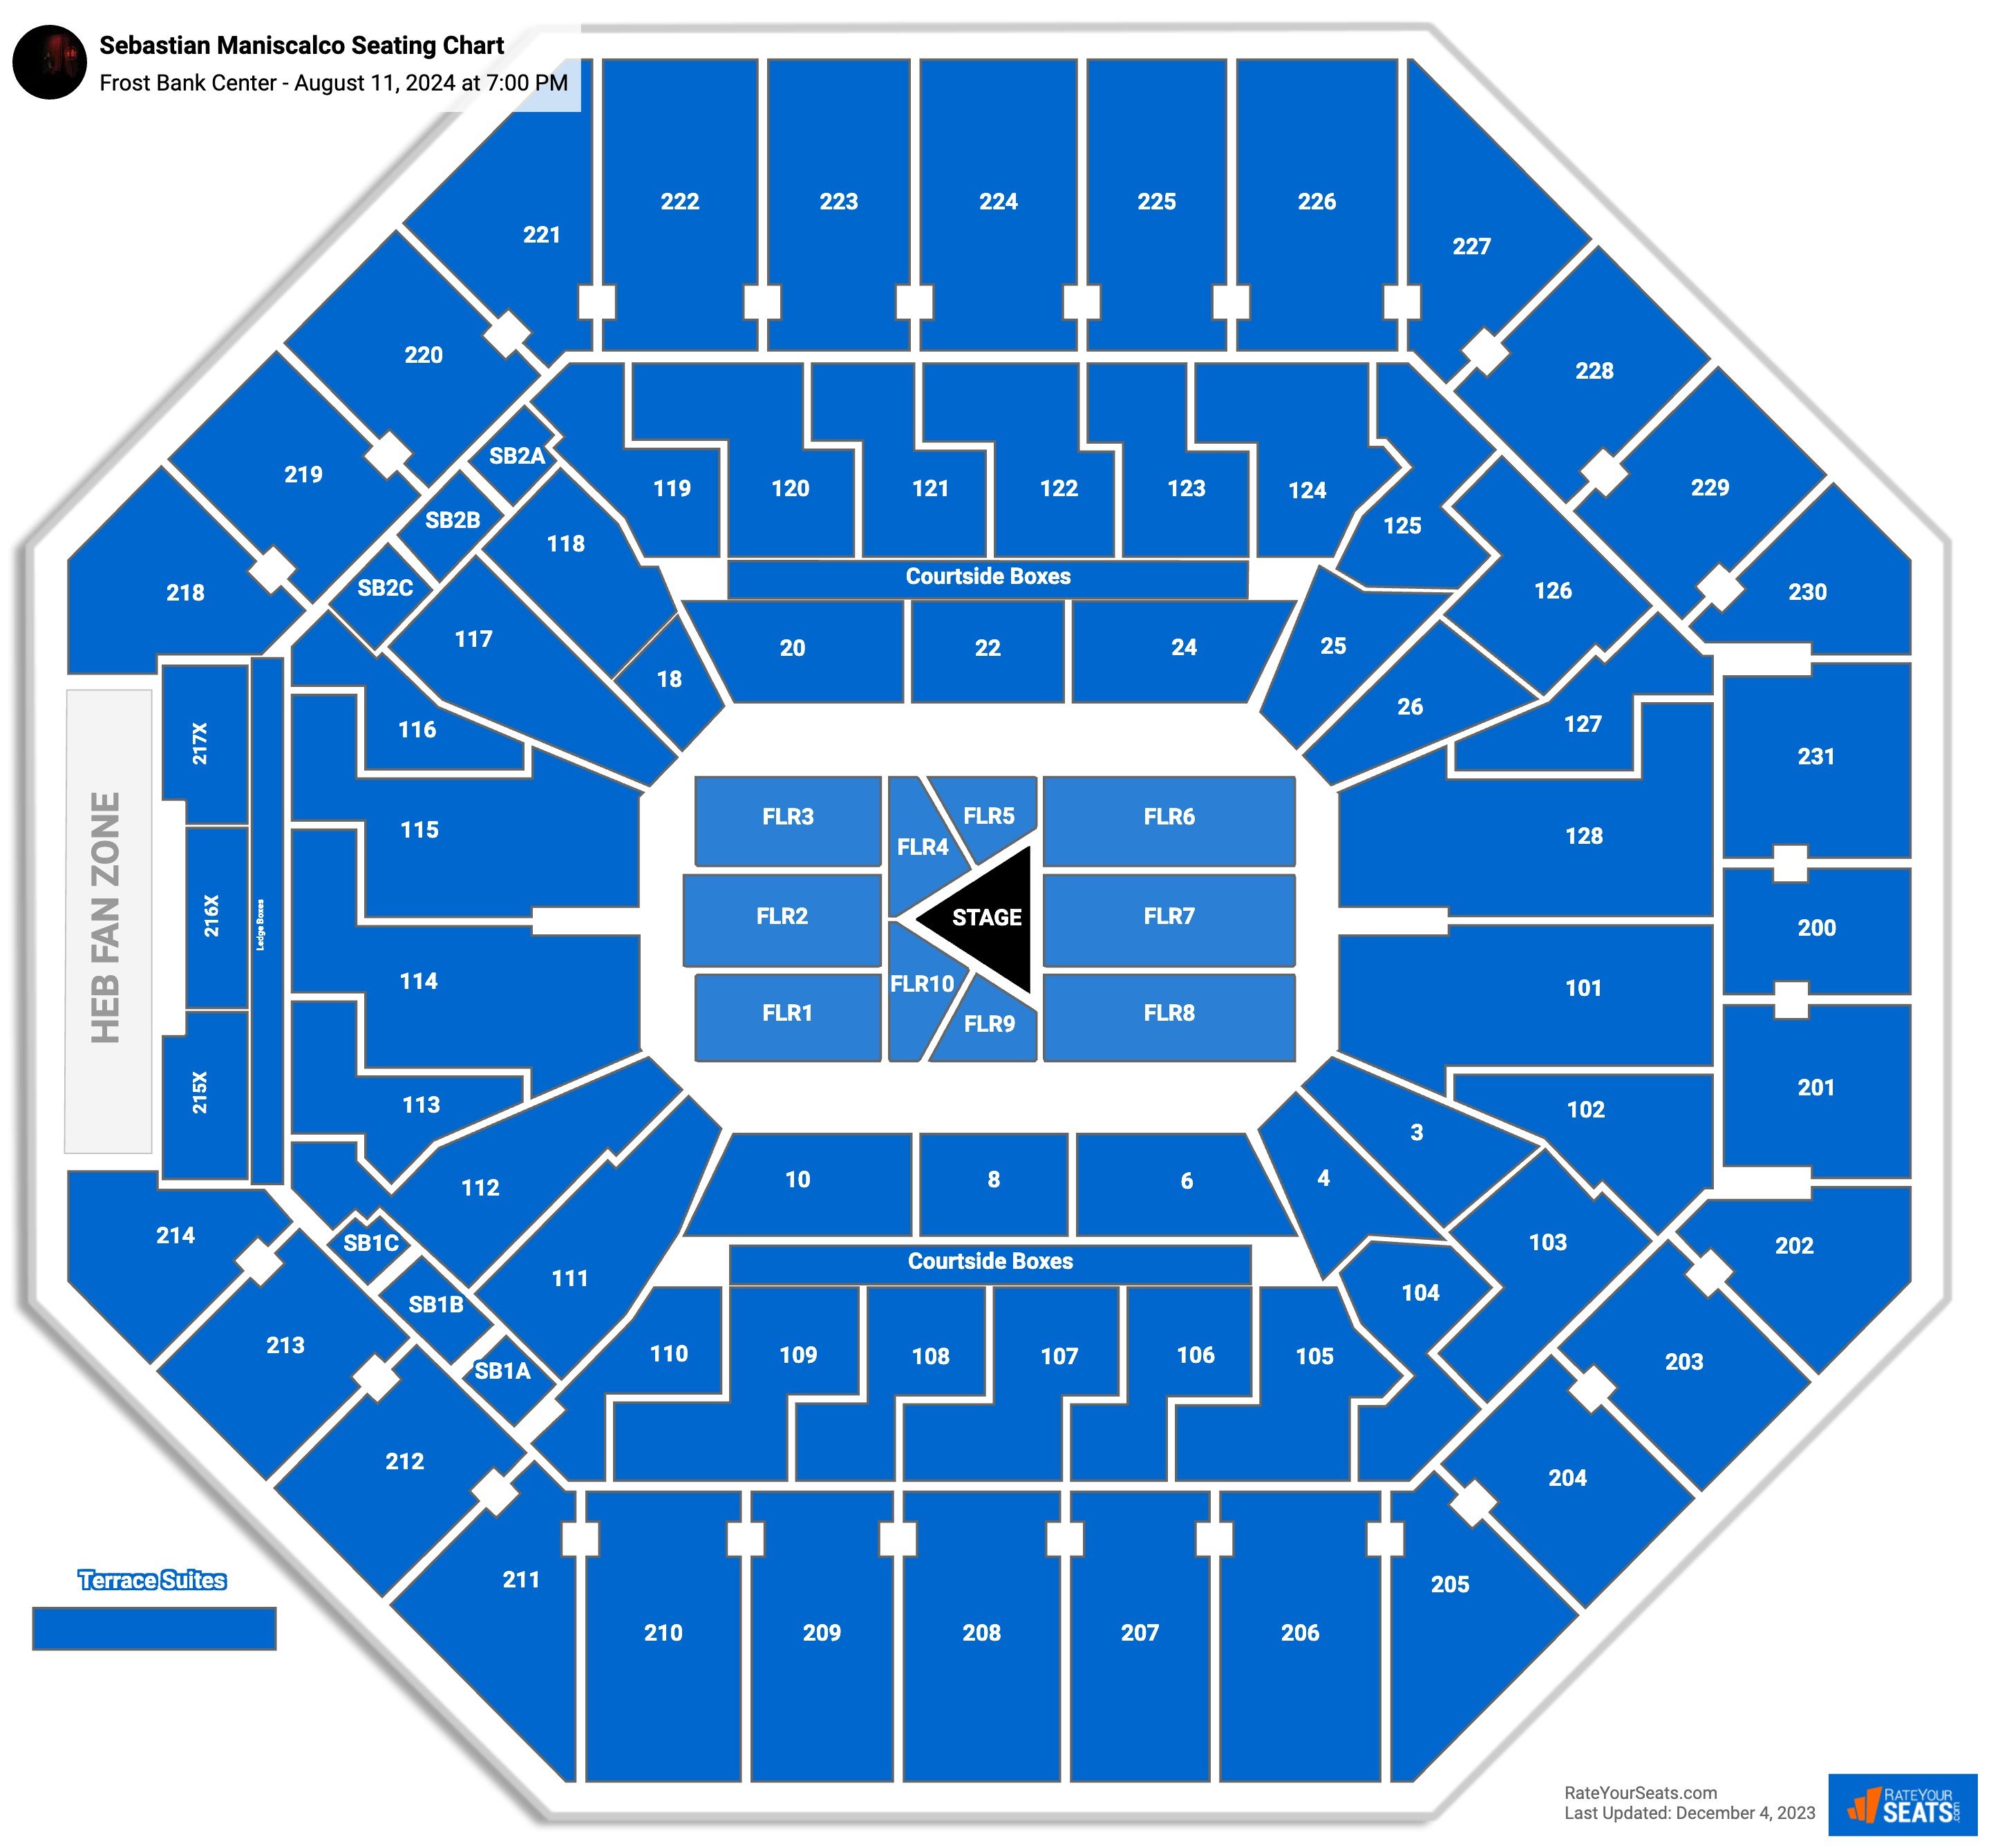 Frost Bank Center Concert Seating Chart